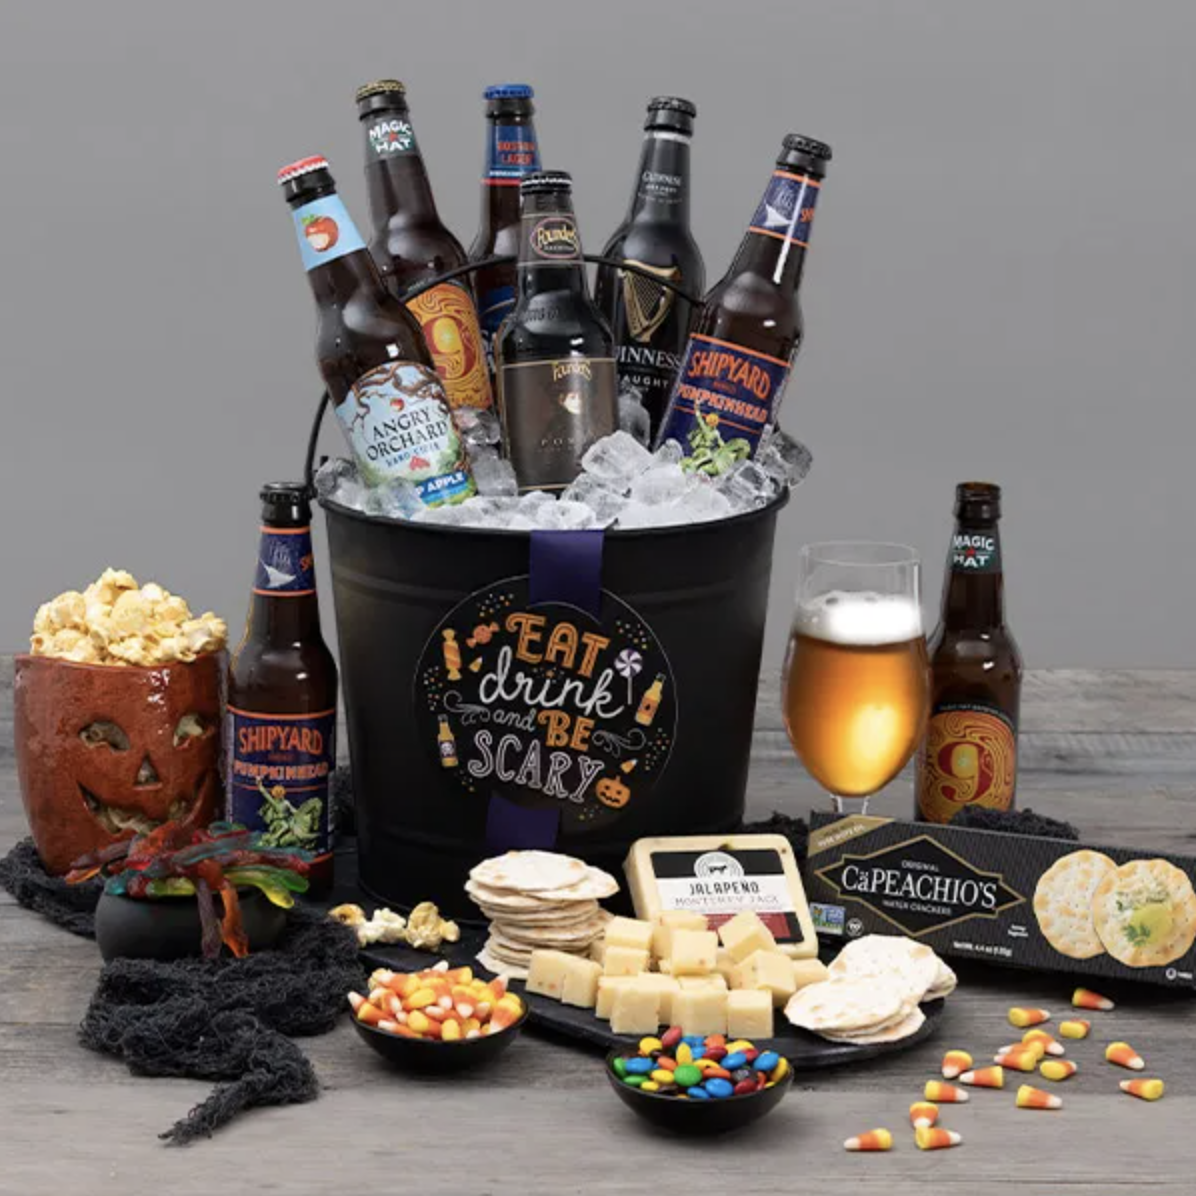 The &quot;Eat, Drink, and Be Scary&quot; beer bucket